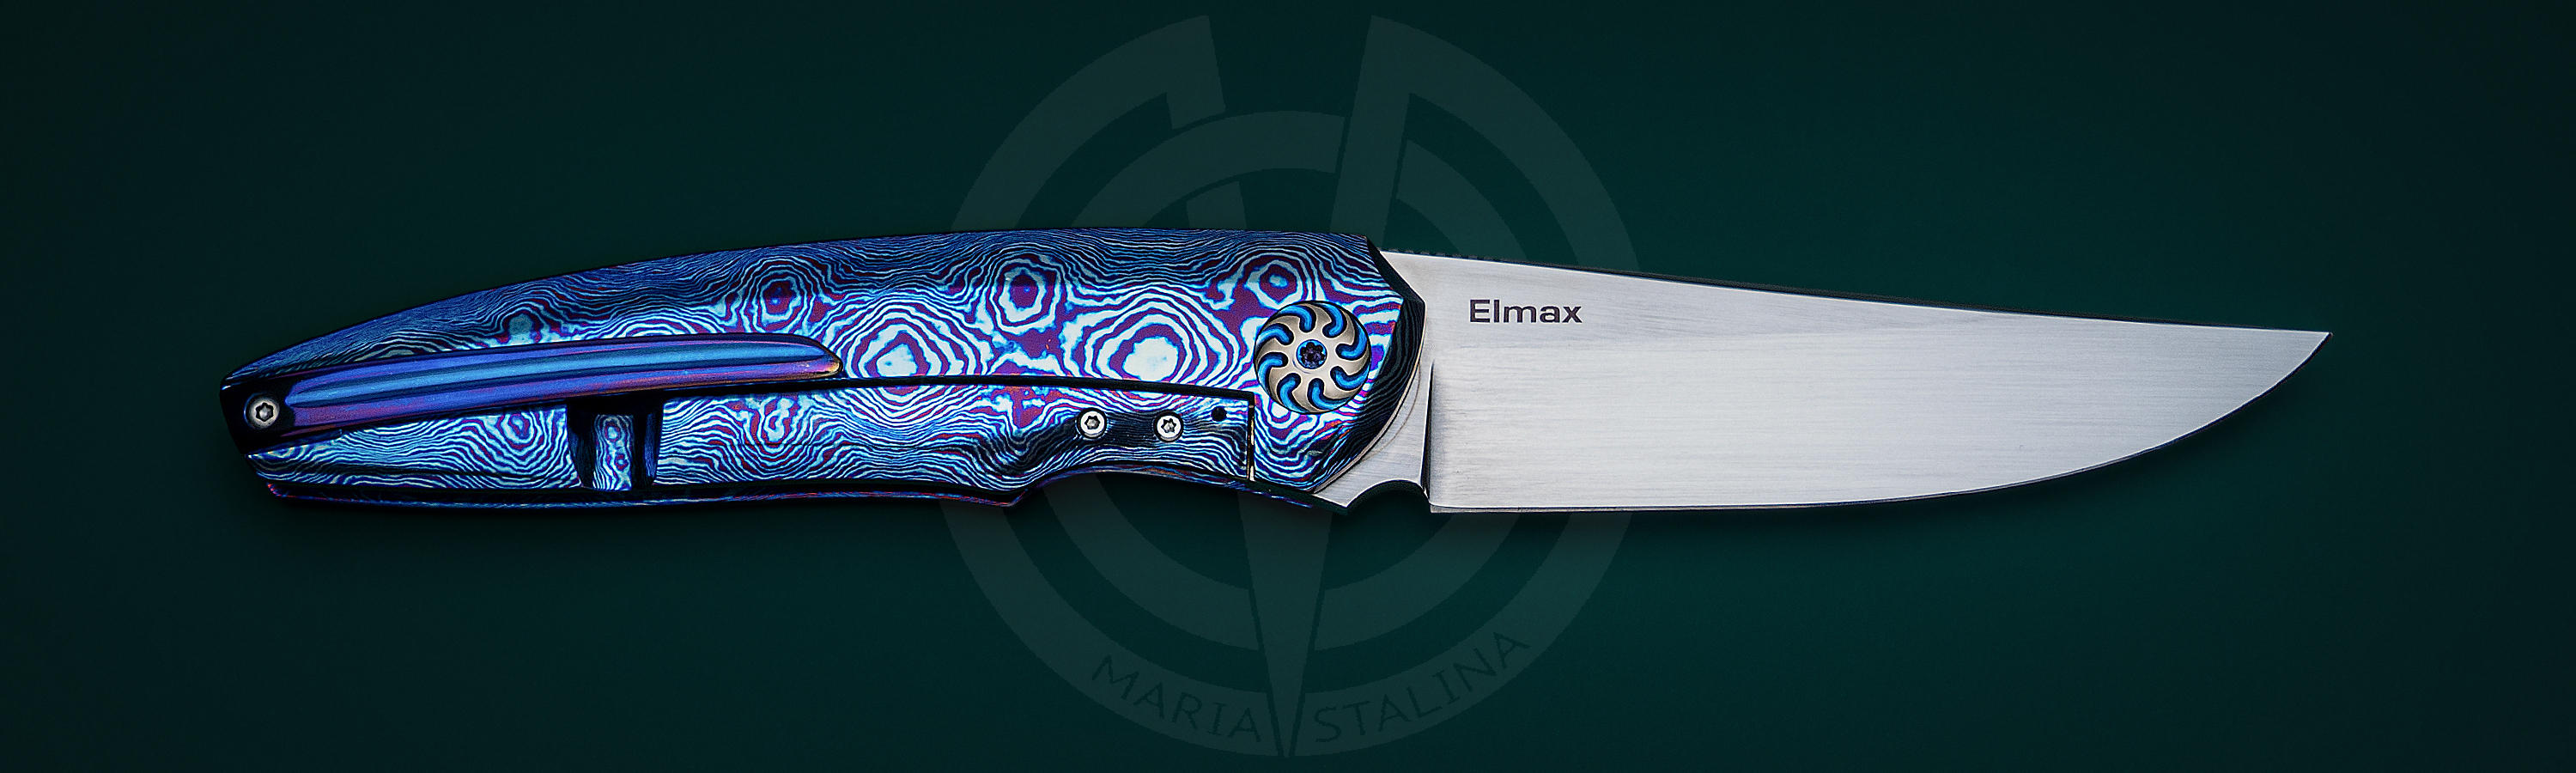 Elmax blade of a knife Northern